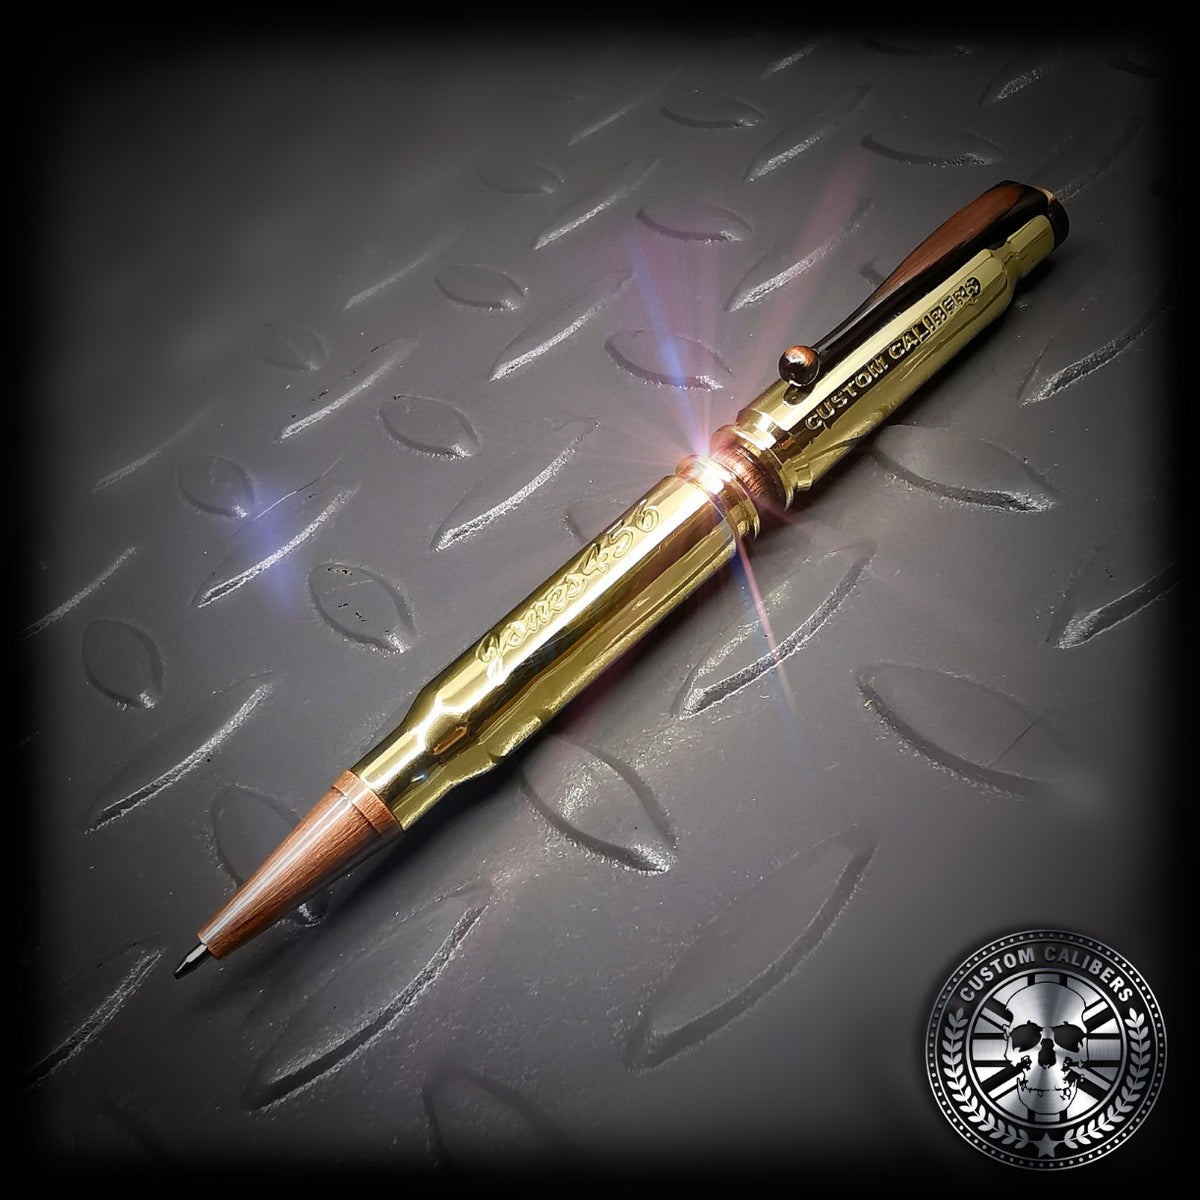 A Well Dressed Bullet - Authentic Bullet Pens